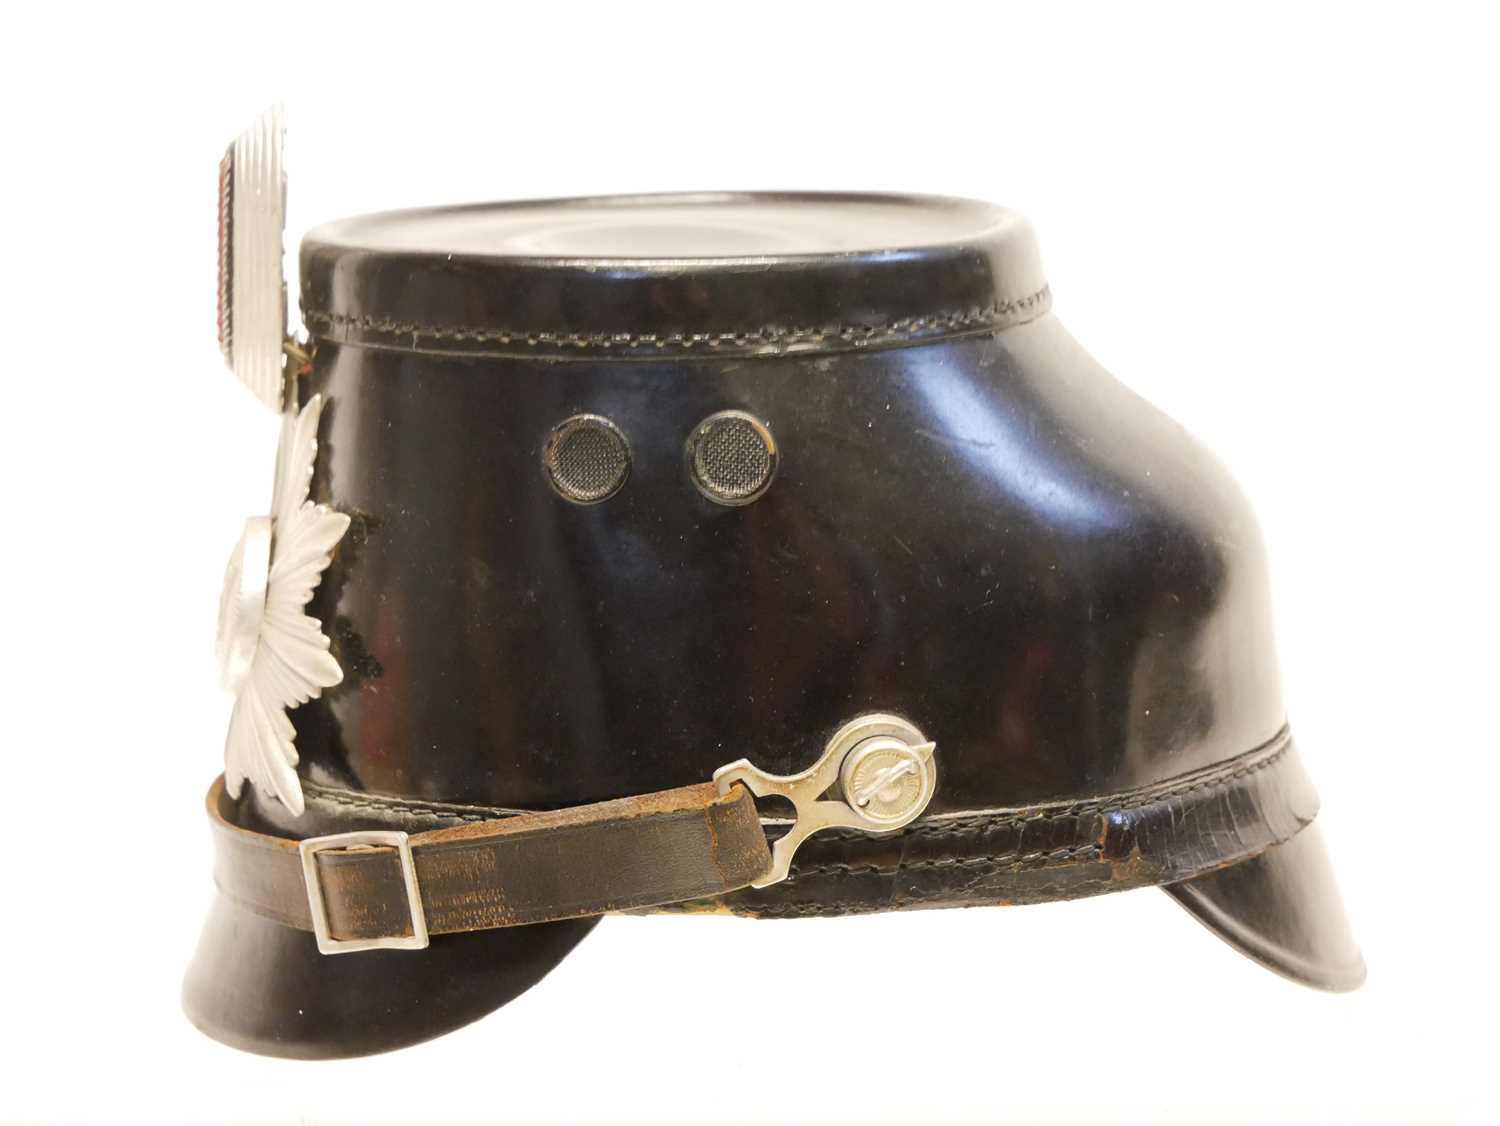 German police shako by Hans Romer, size 56, with West German star shako plate. 24cm wide. - Image 2 of 7